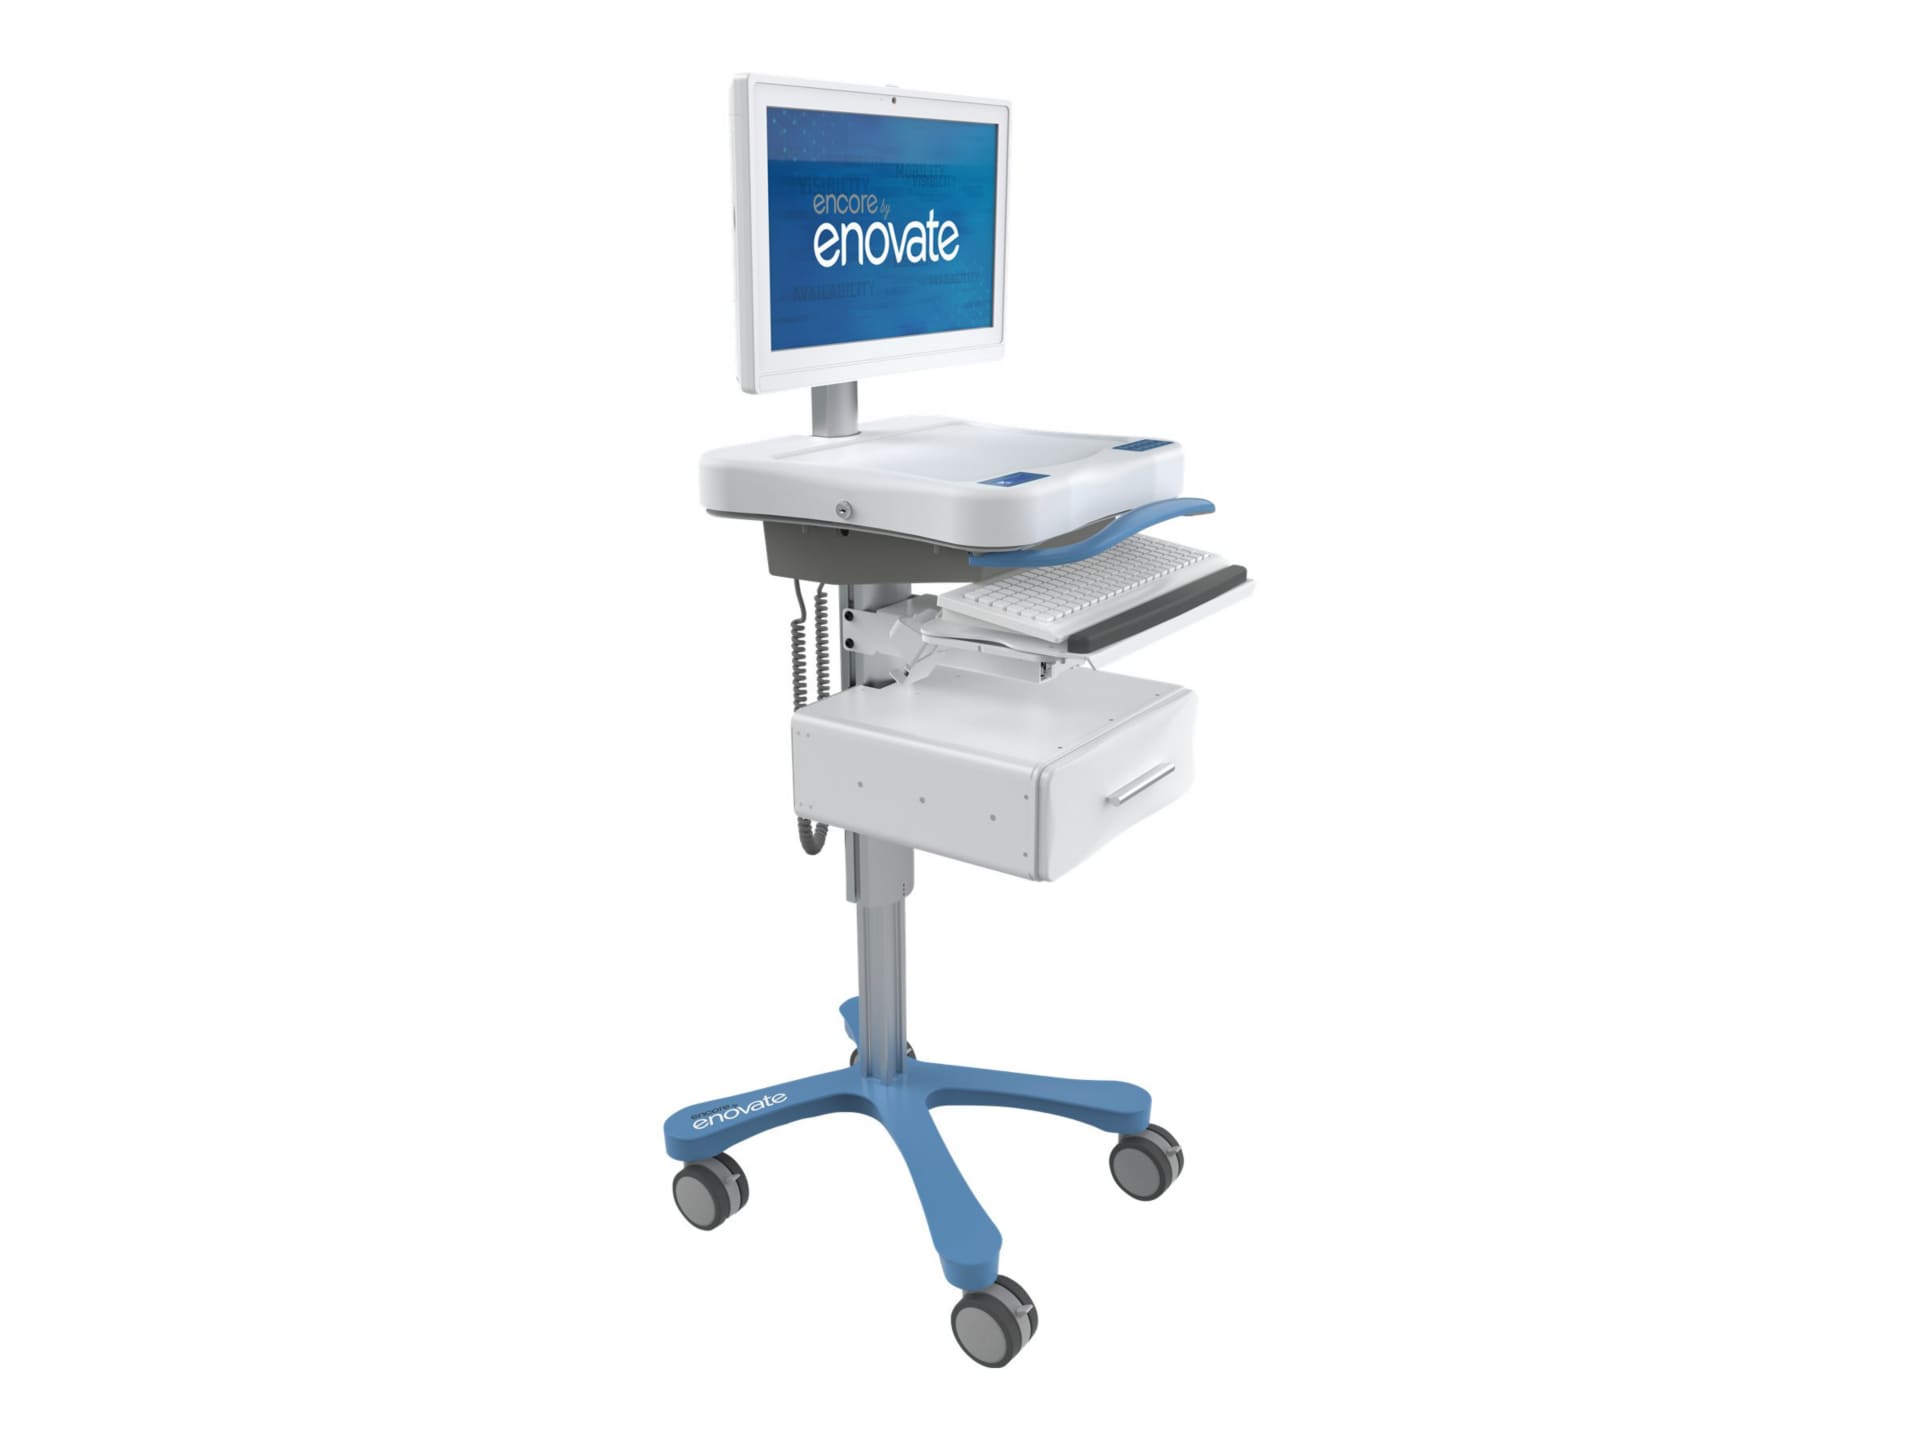 Enovate Medical Encore cart - for LCD display / keyboard / mouse